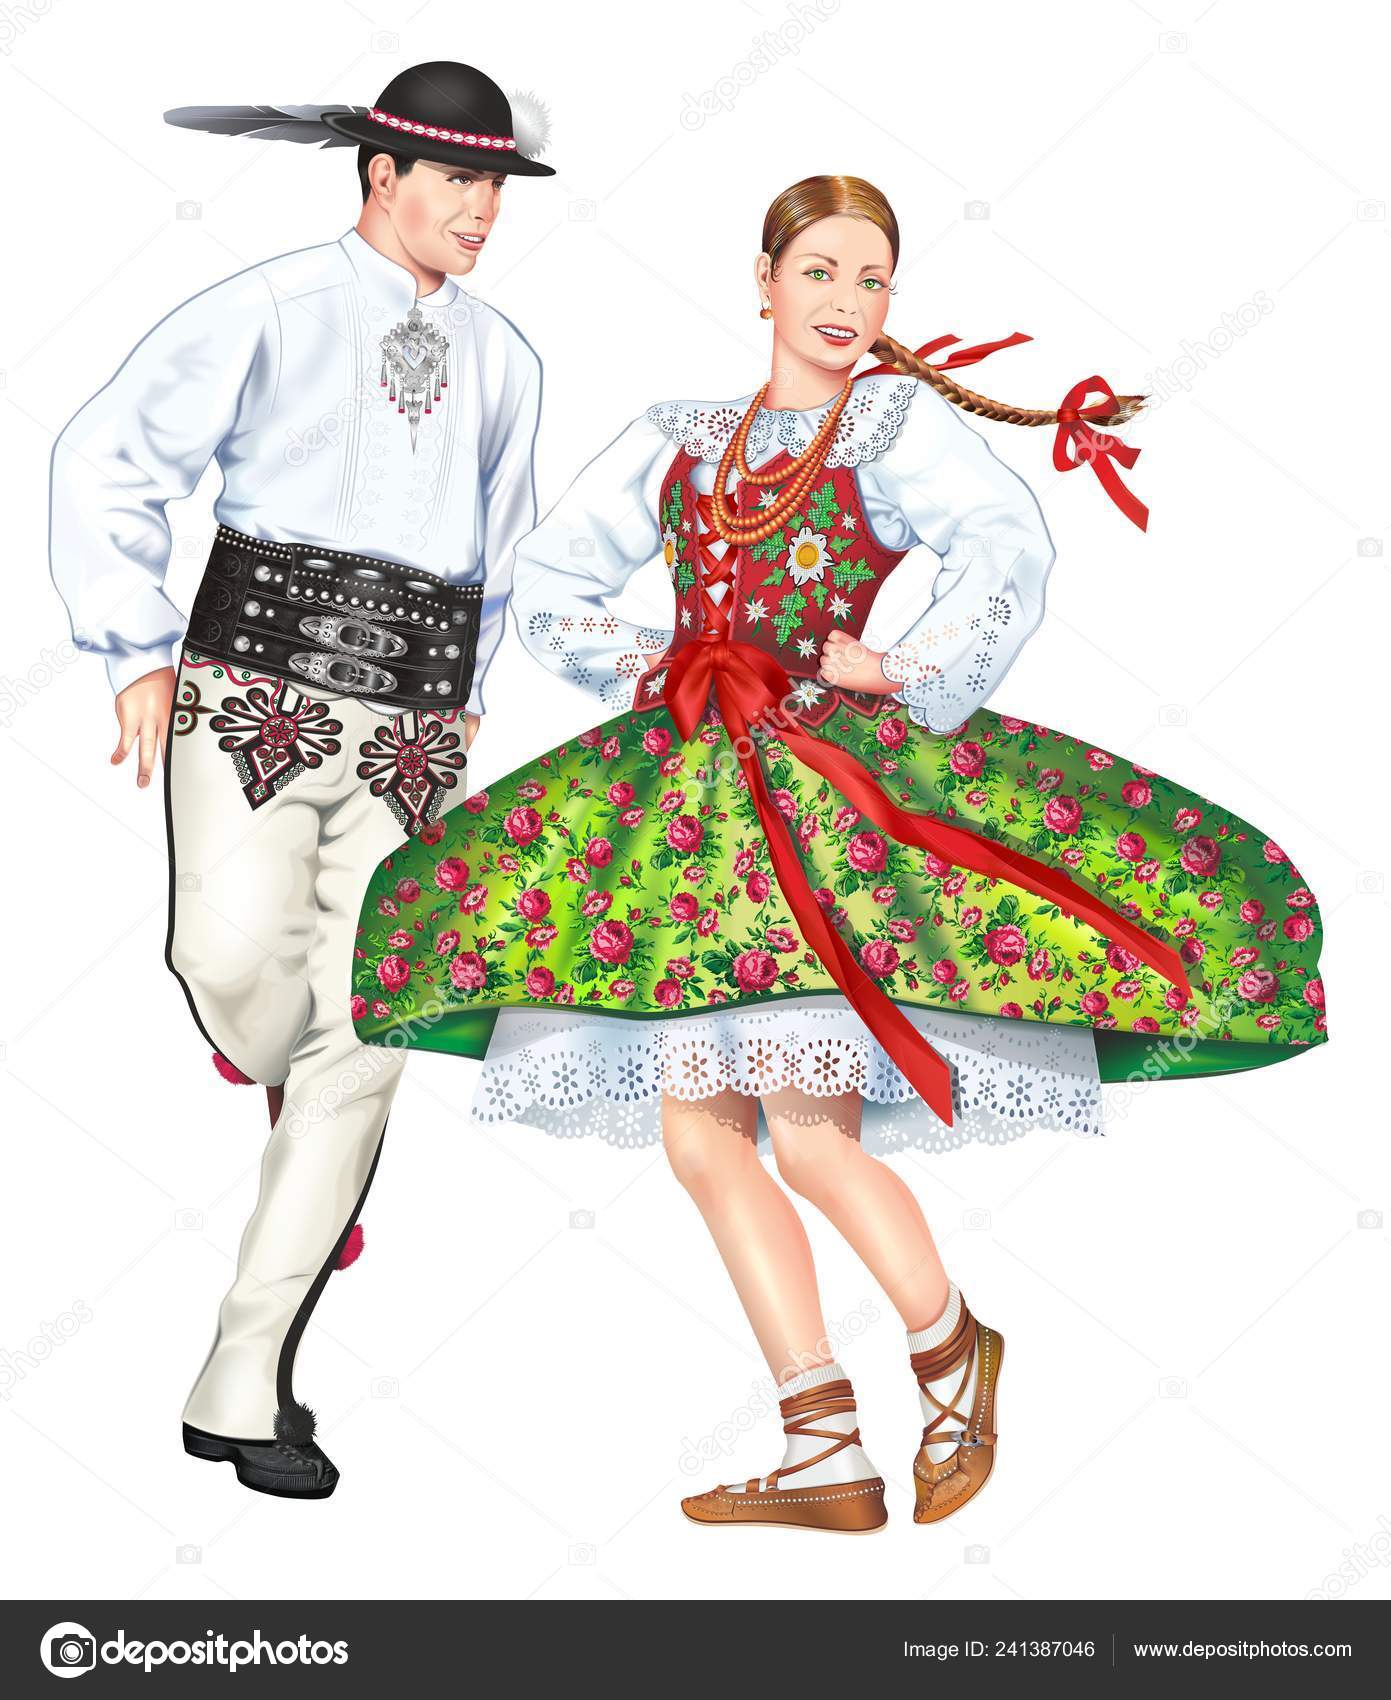 Dancing Polish Highlanders Wearing Traditional Costumes Isolated